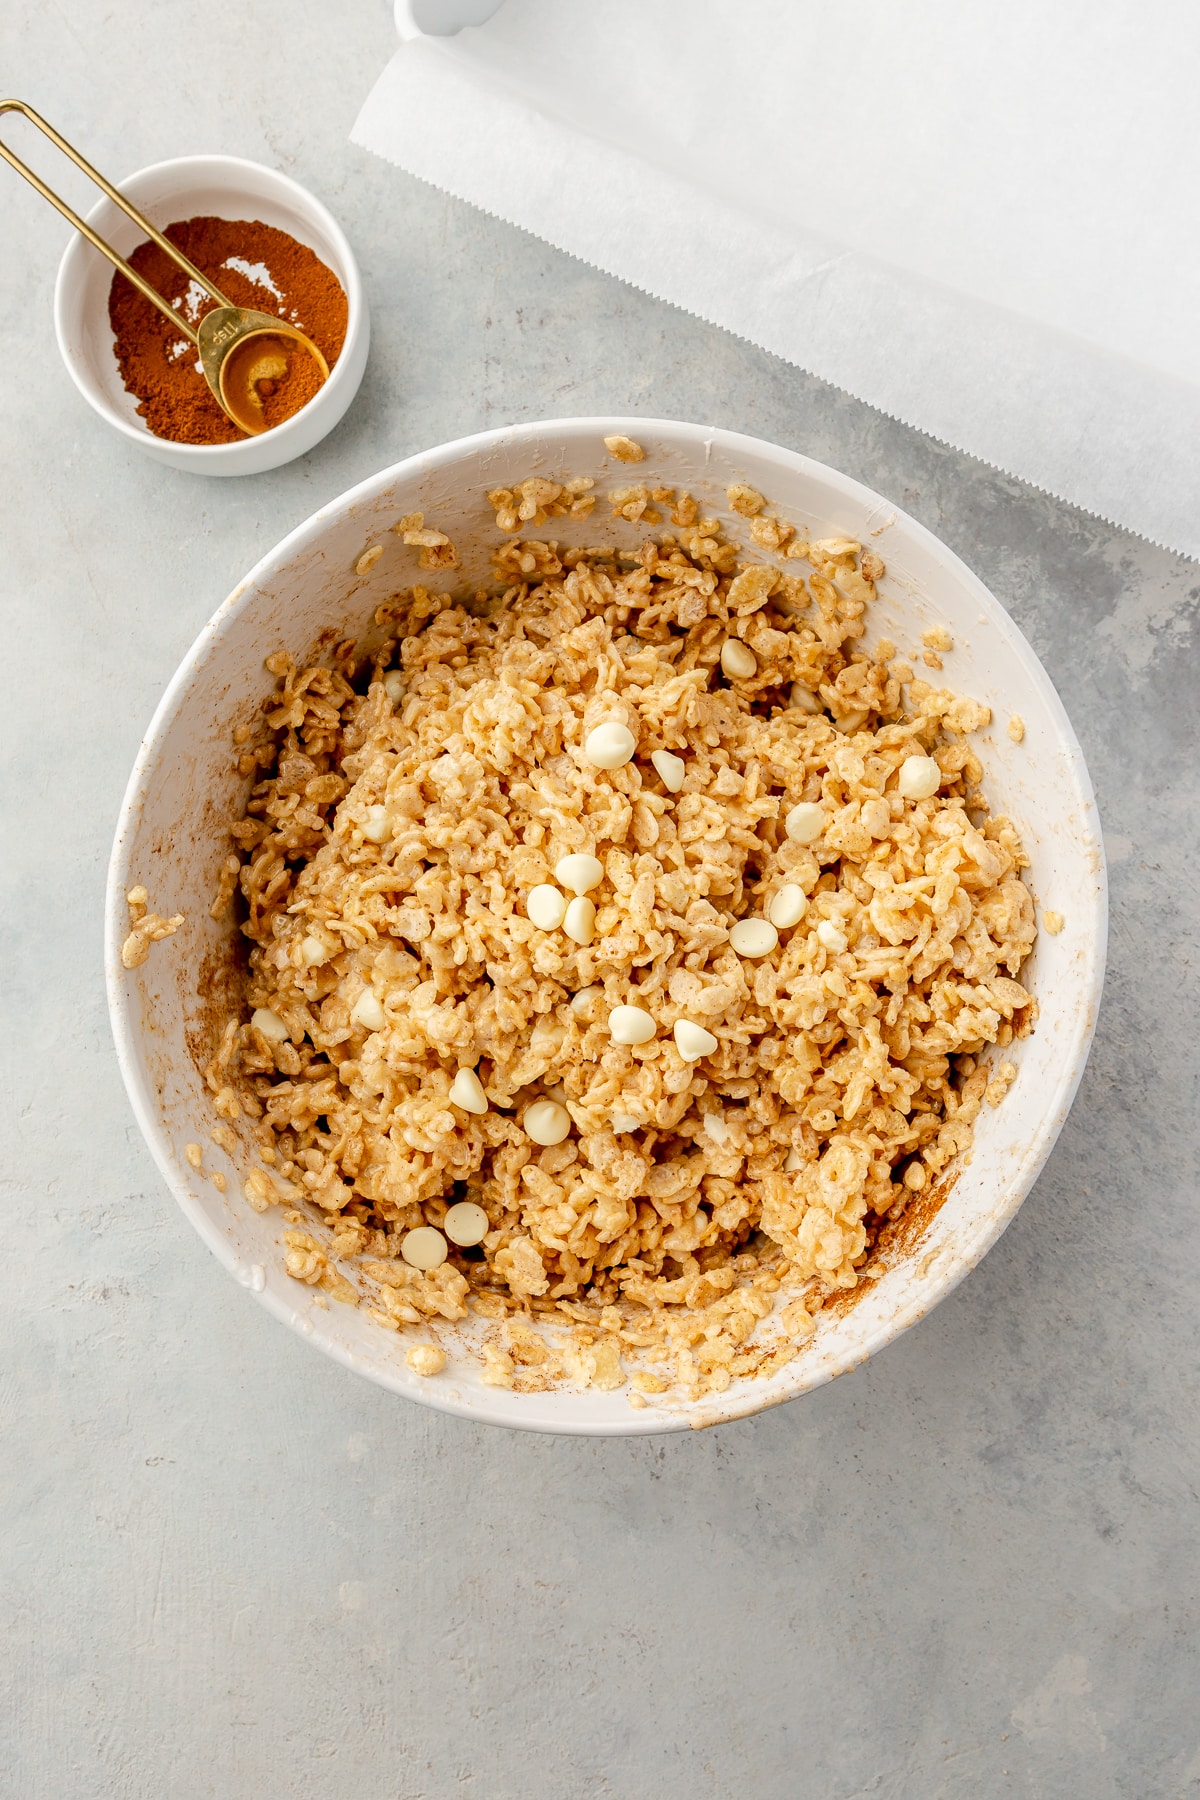 A rice krispie treat mixture (melted marshmallows, rice crisp cereal, white chocolate chips, and pumpkin spice) stirred together in a large bowl.